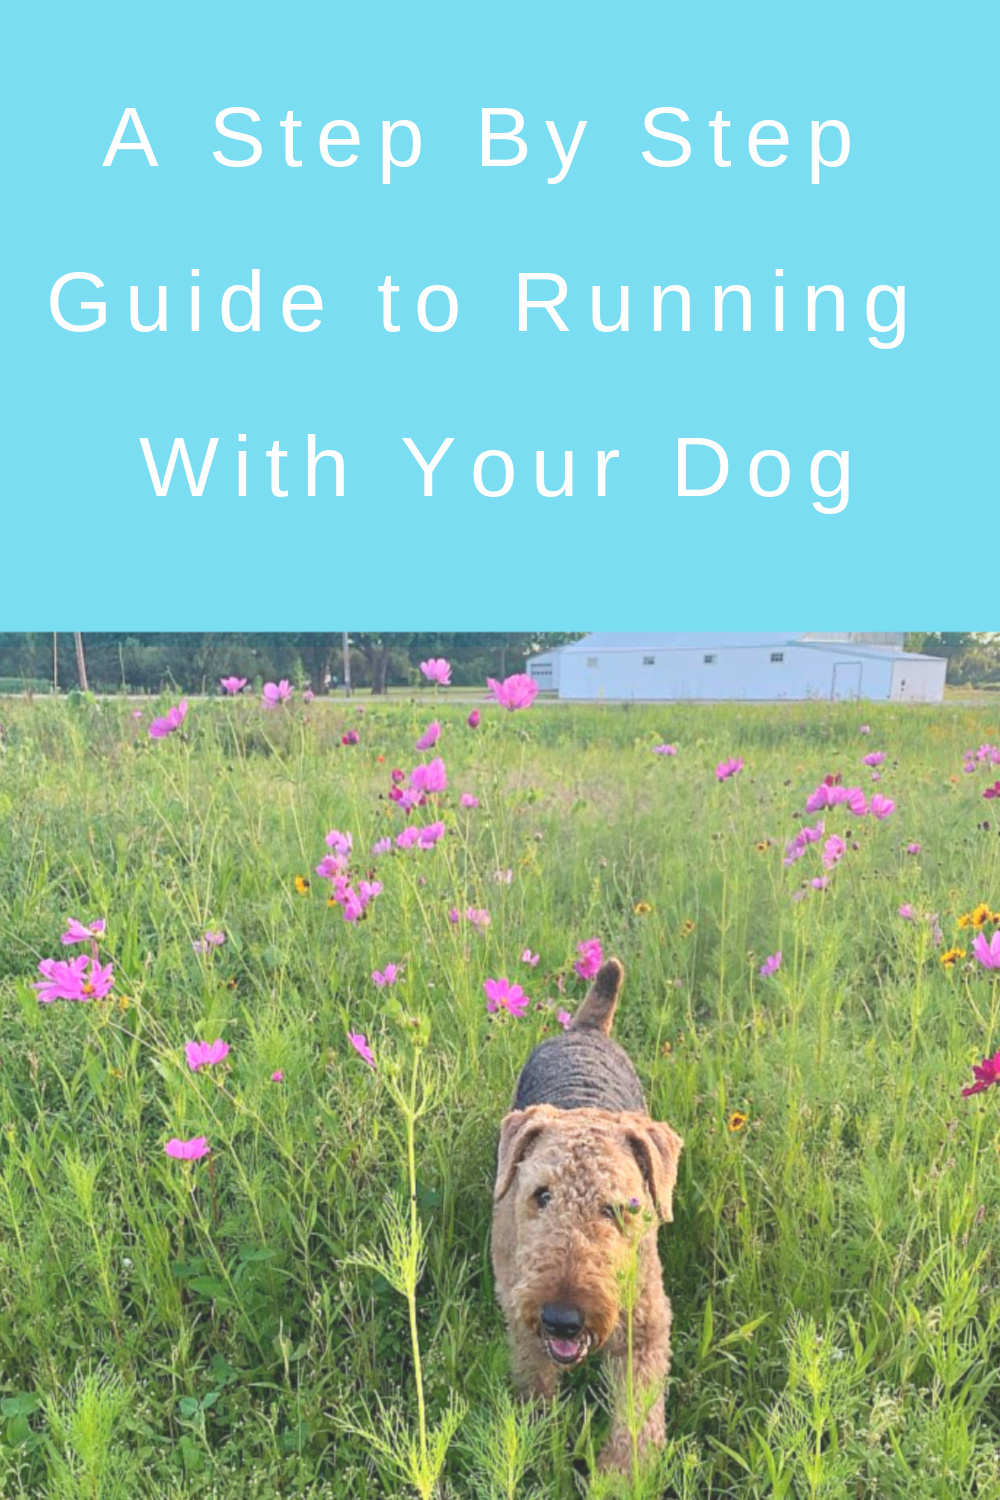 A Step By Step Guide to Running with Your Dog